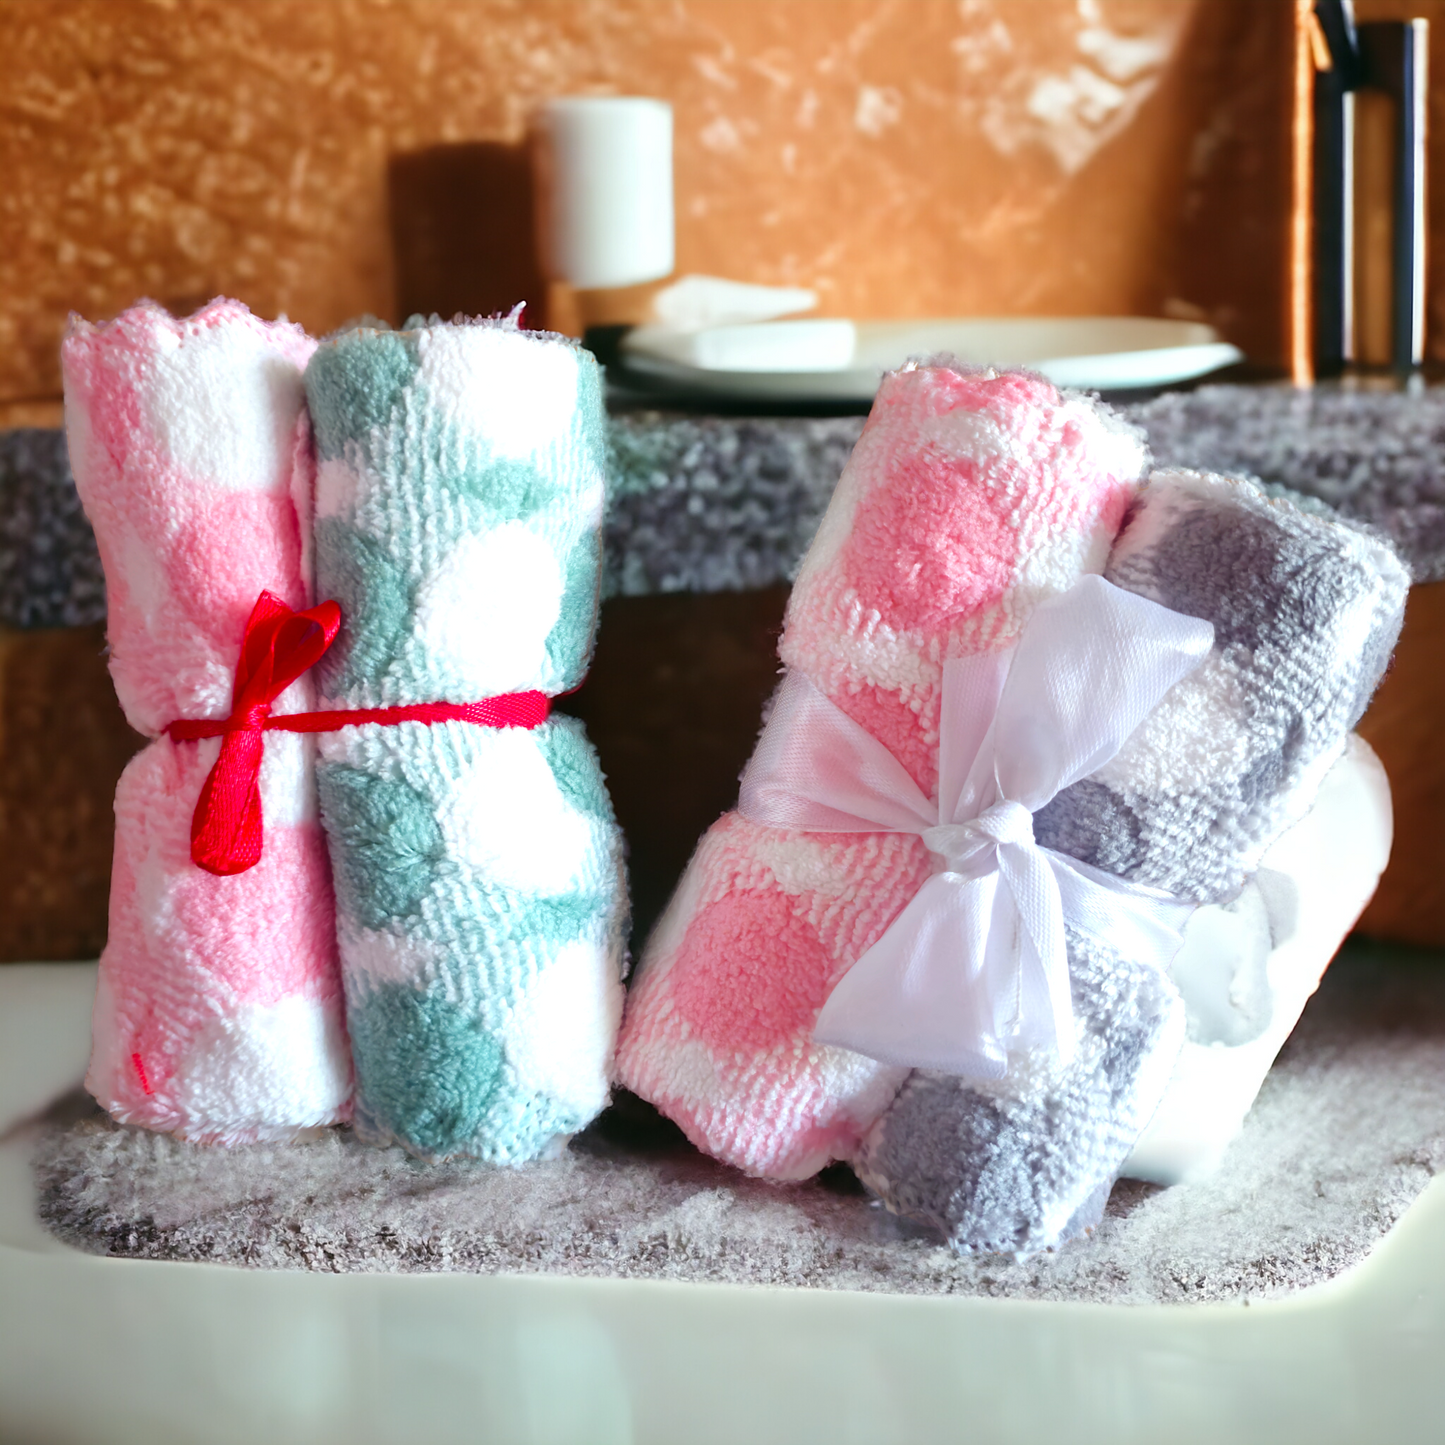 Tender Touch Face Towels